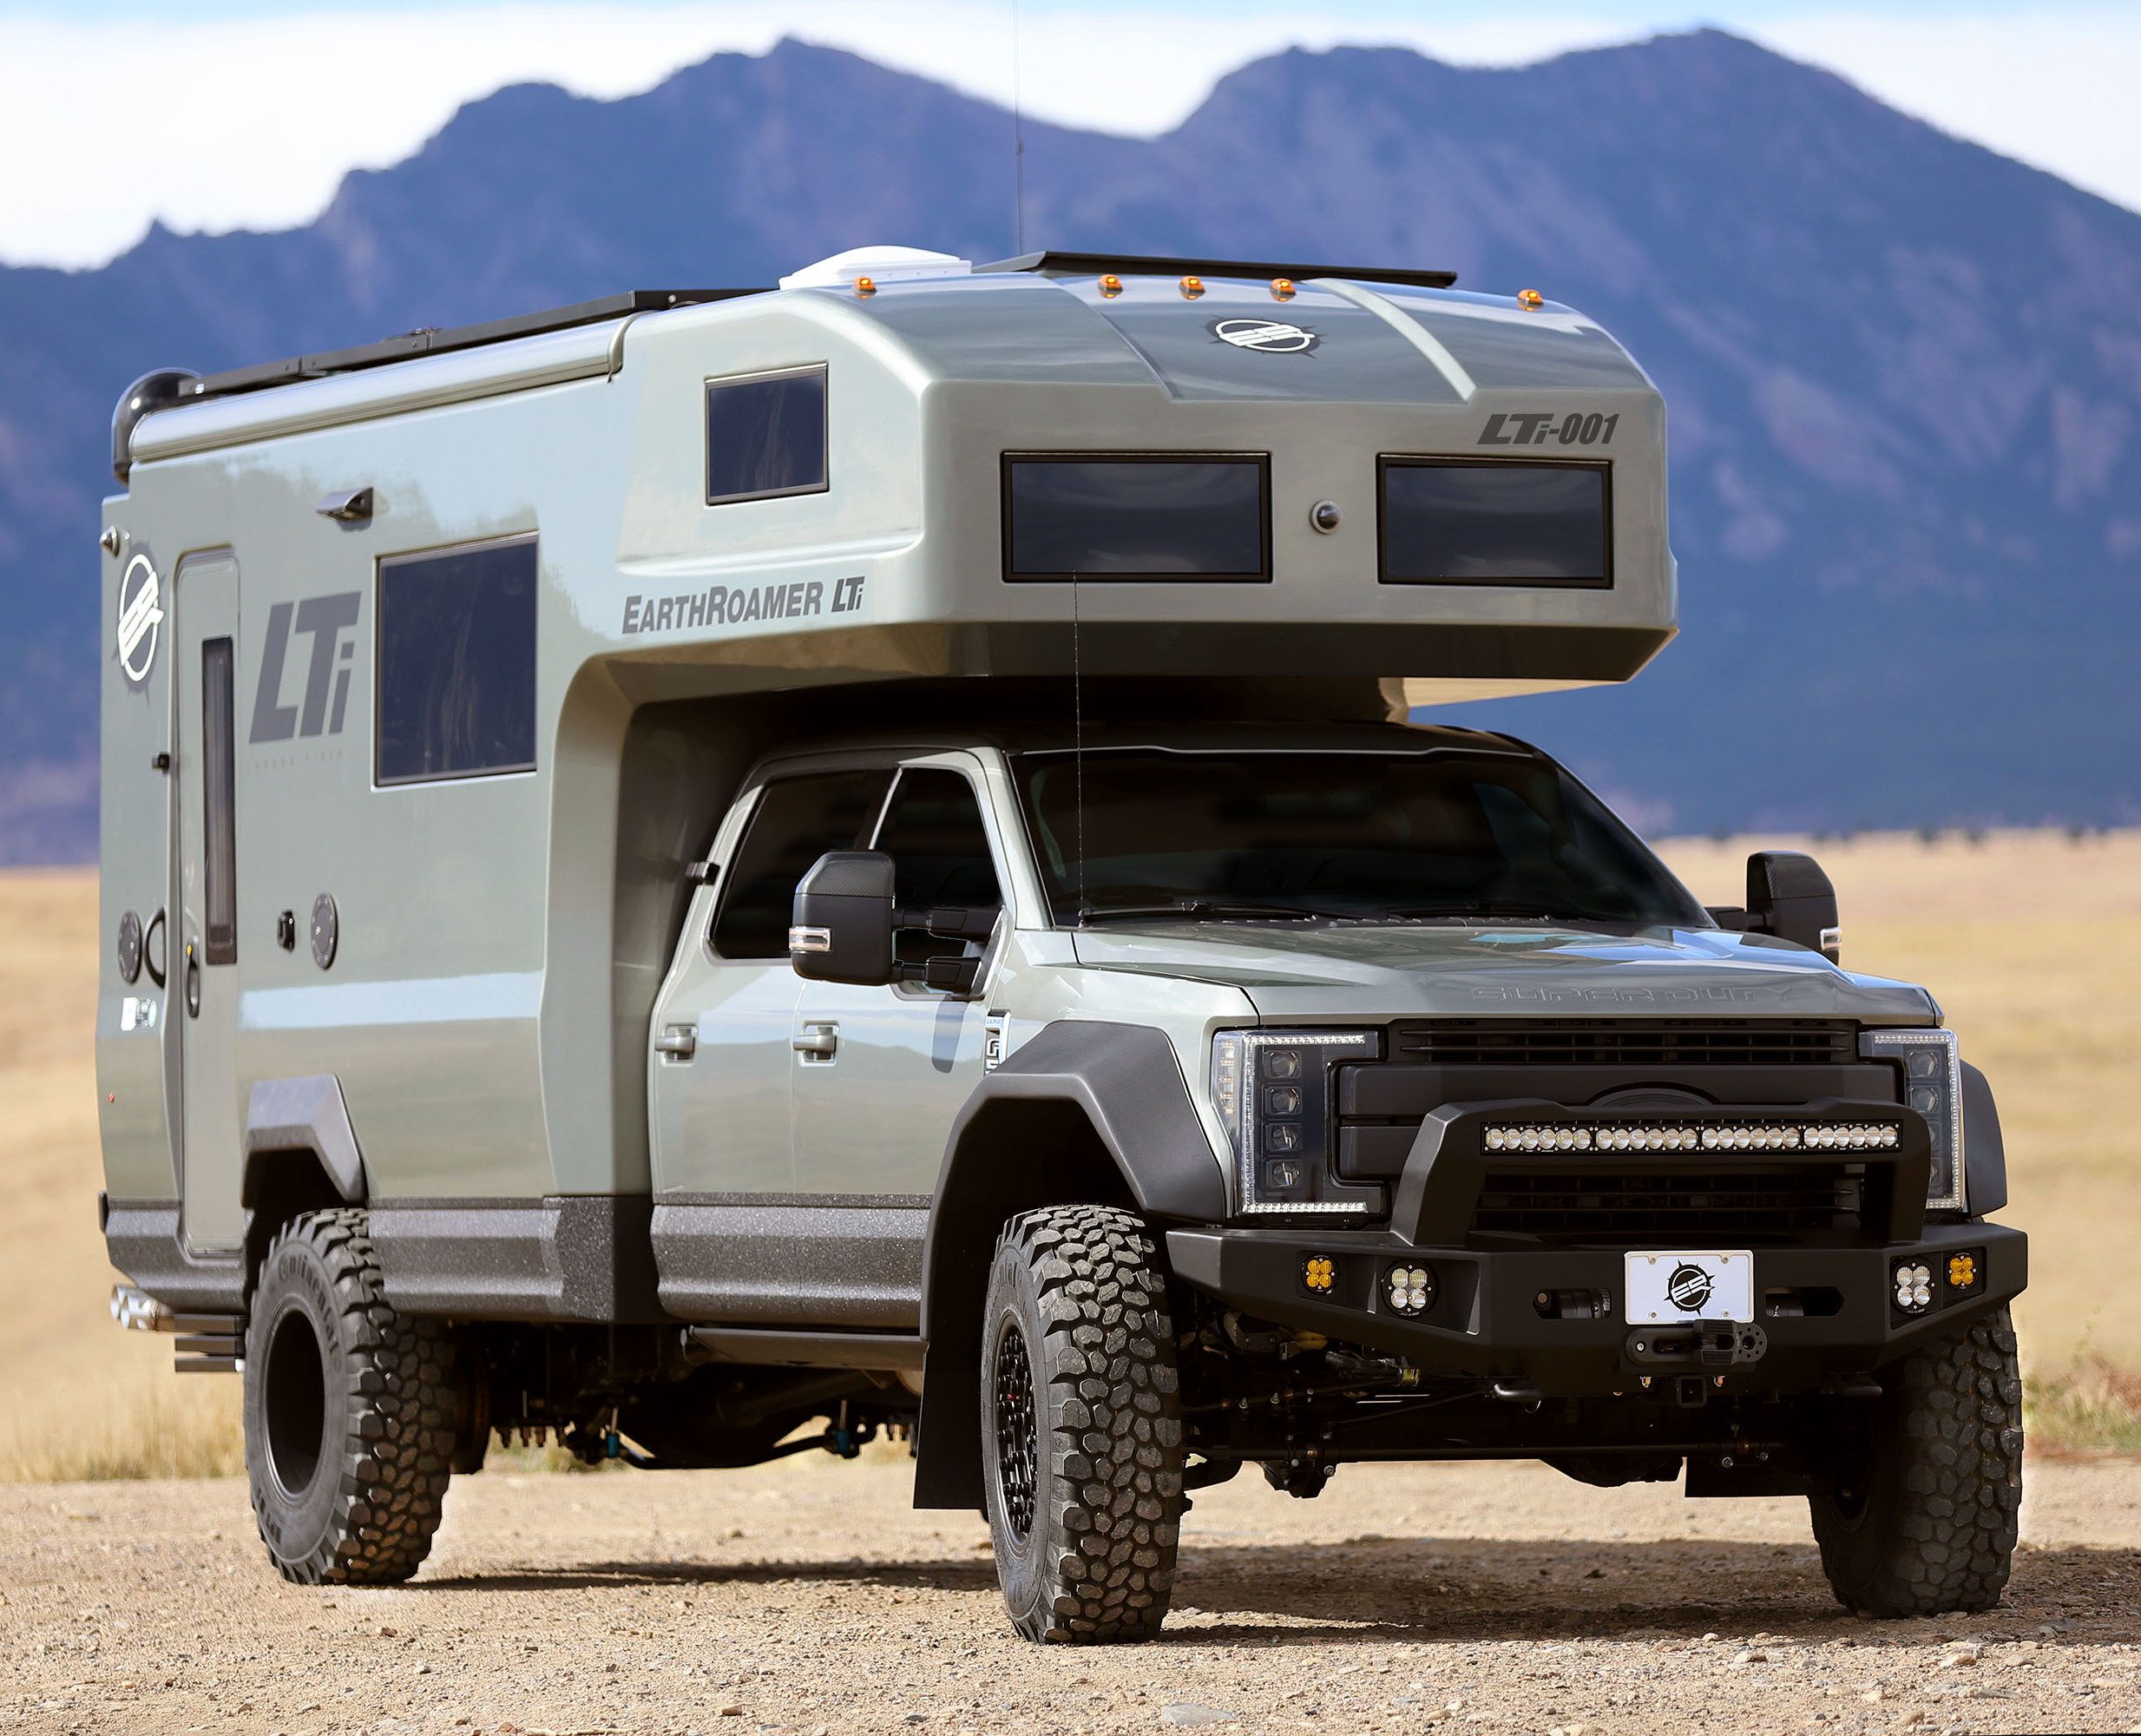 A $220,000 Camper Van From a Company That Became a Nationwide Hit